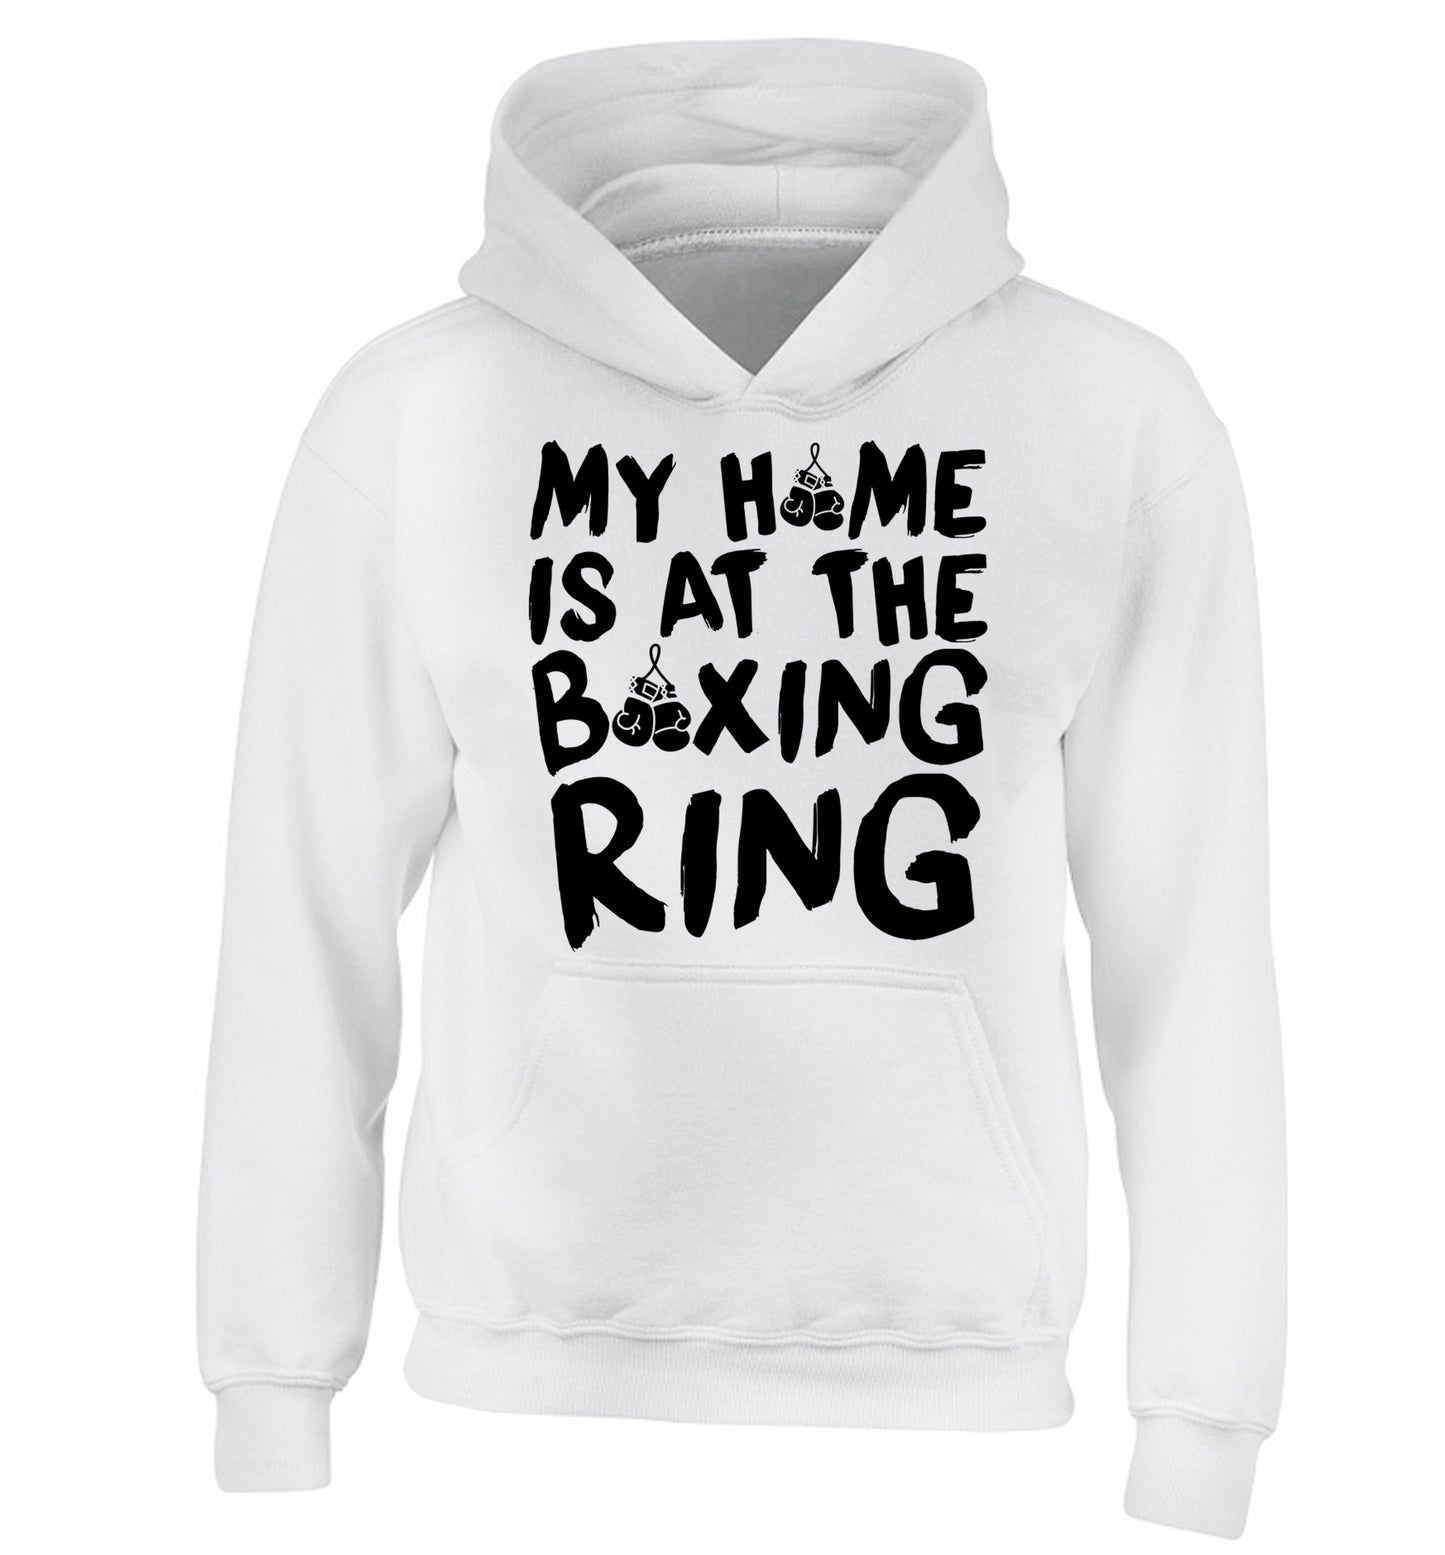 My home is at the boxing ring children's white hoodie 12-14 Years